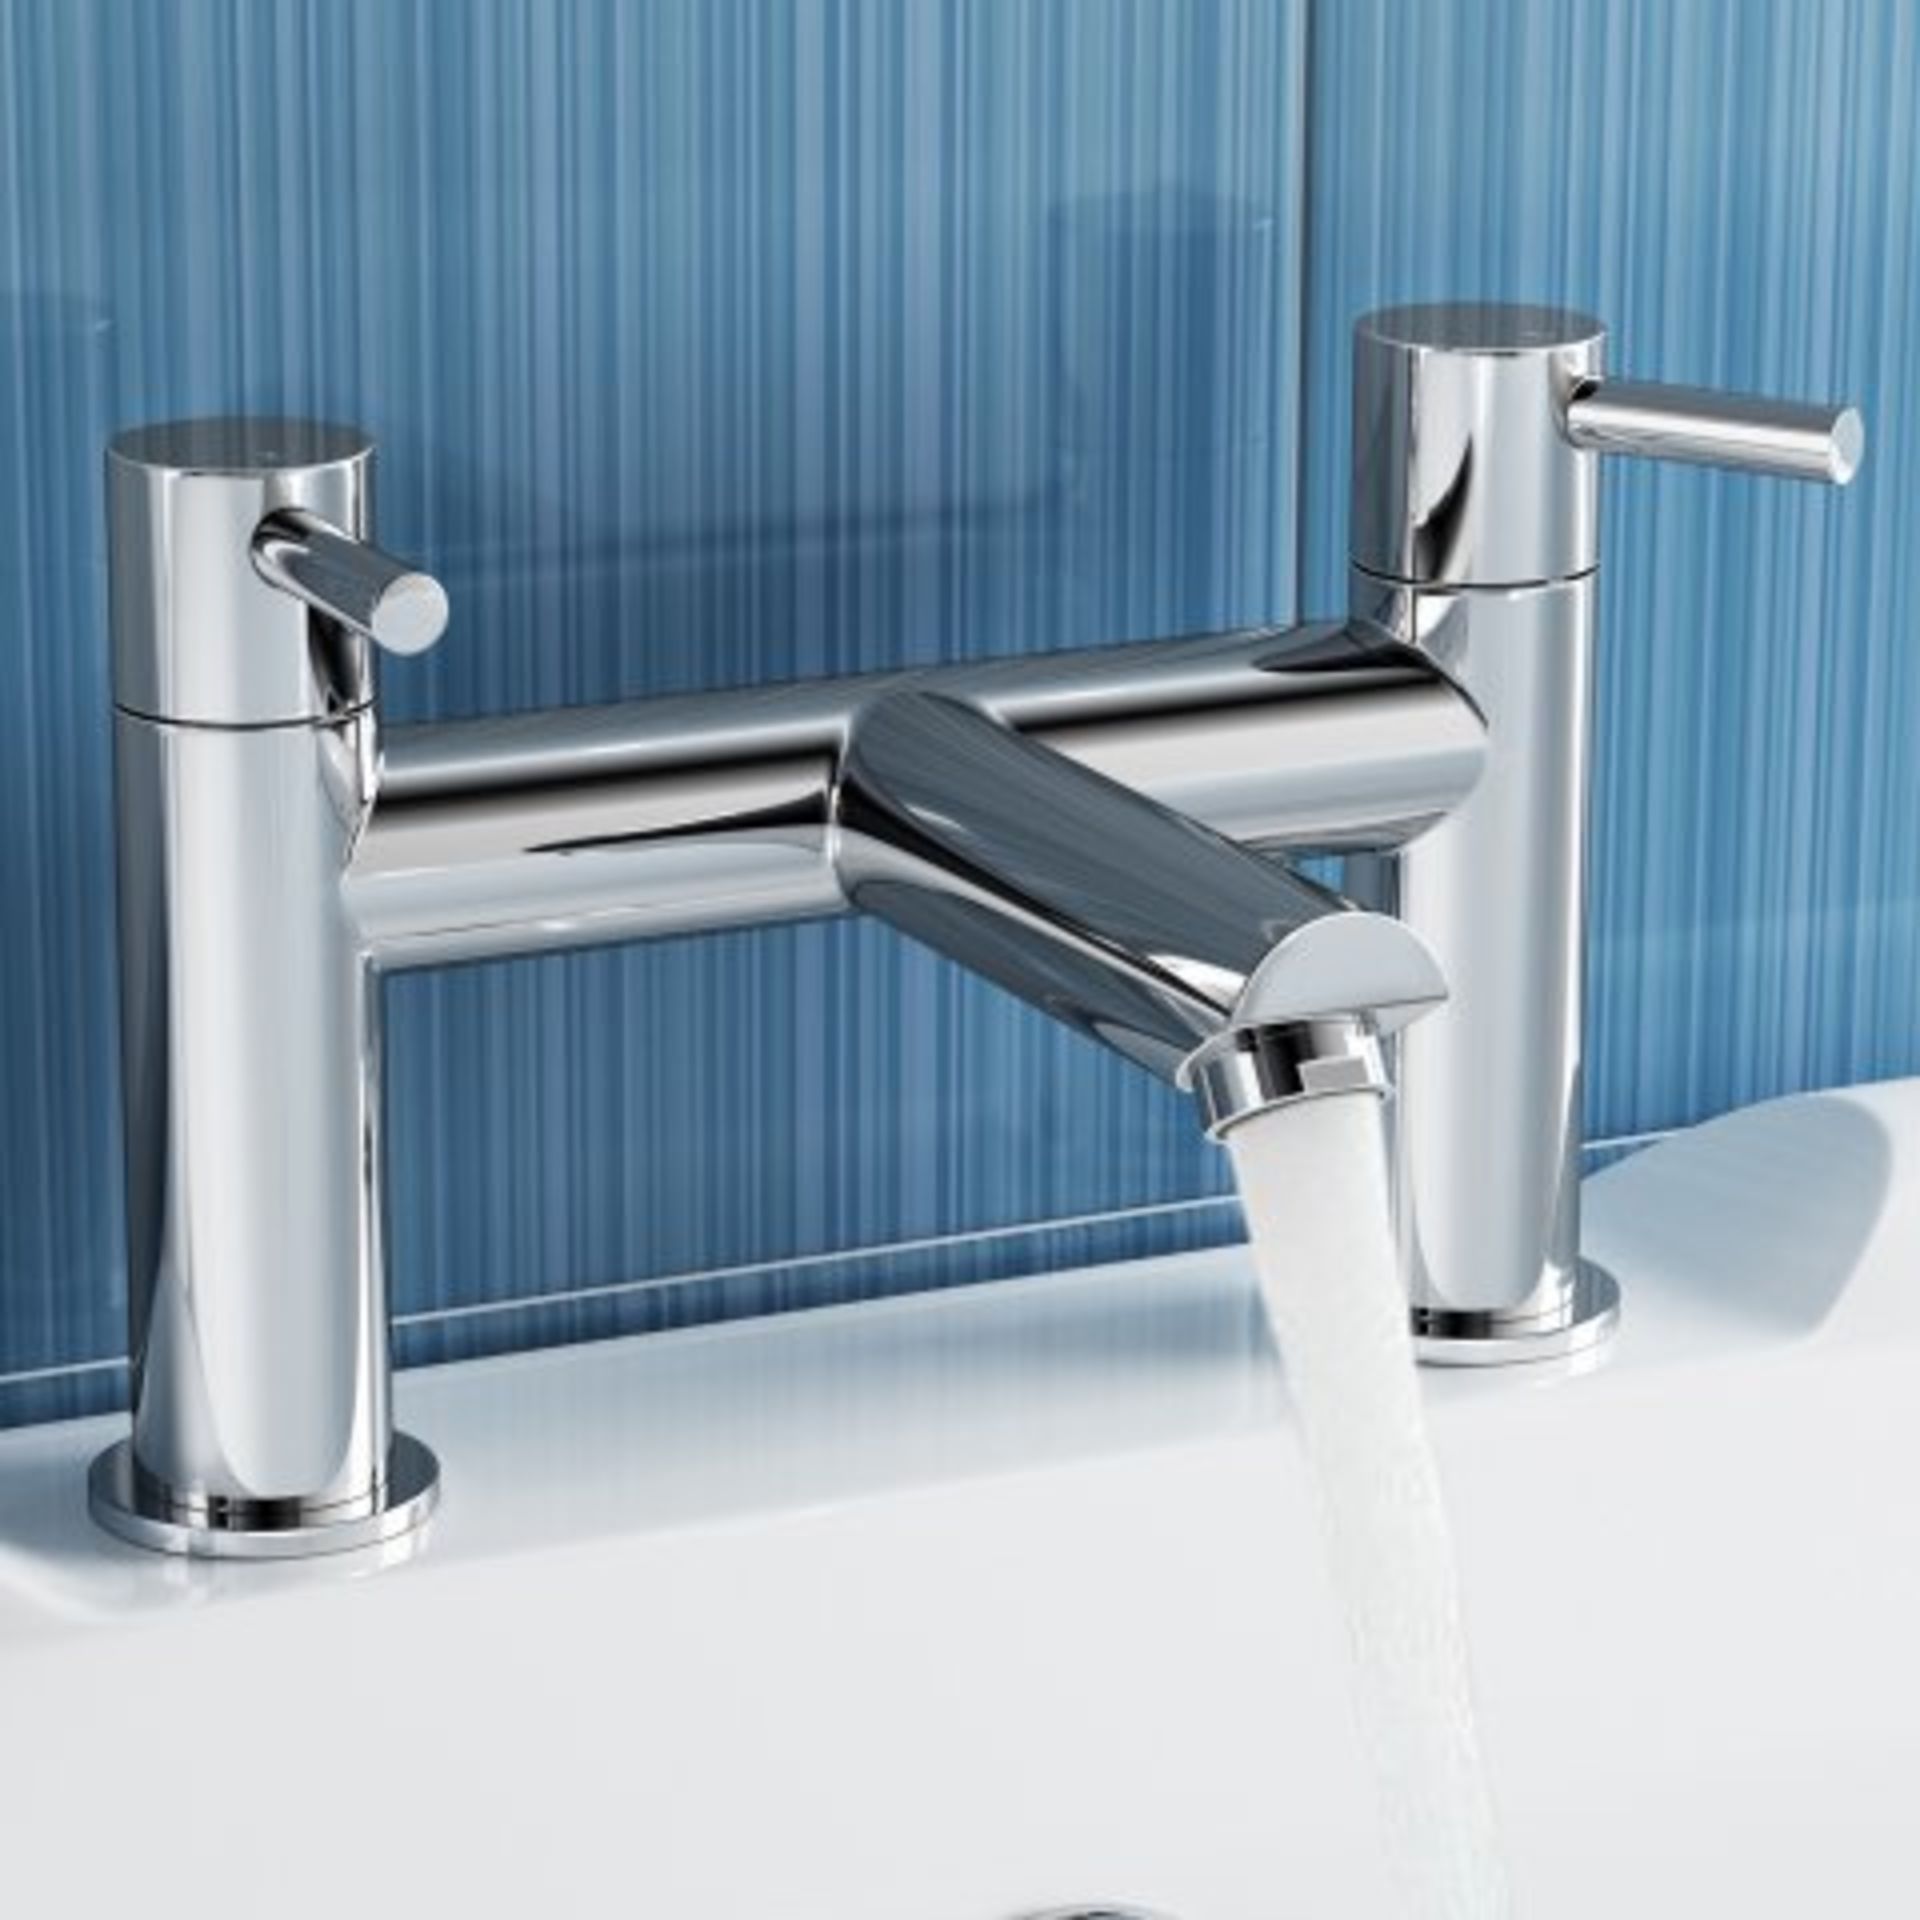 (I68) Gladstone II Bath Filler Mixer Tap Presenting a contemporary design, this solid brass tap